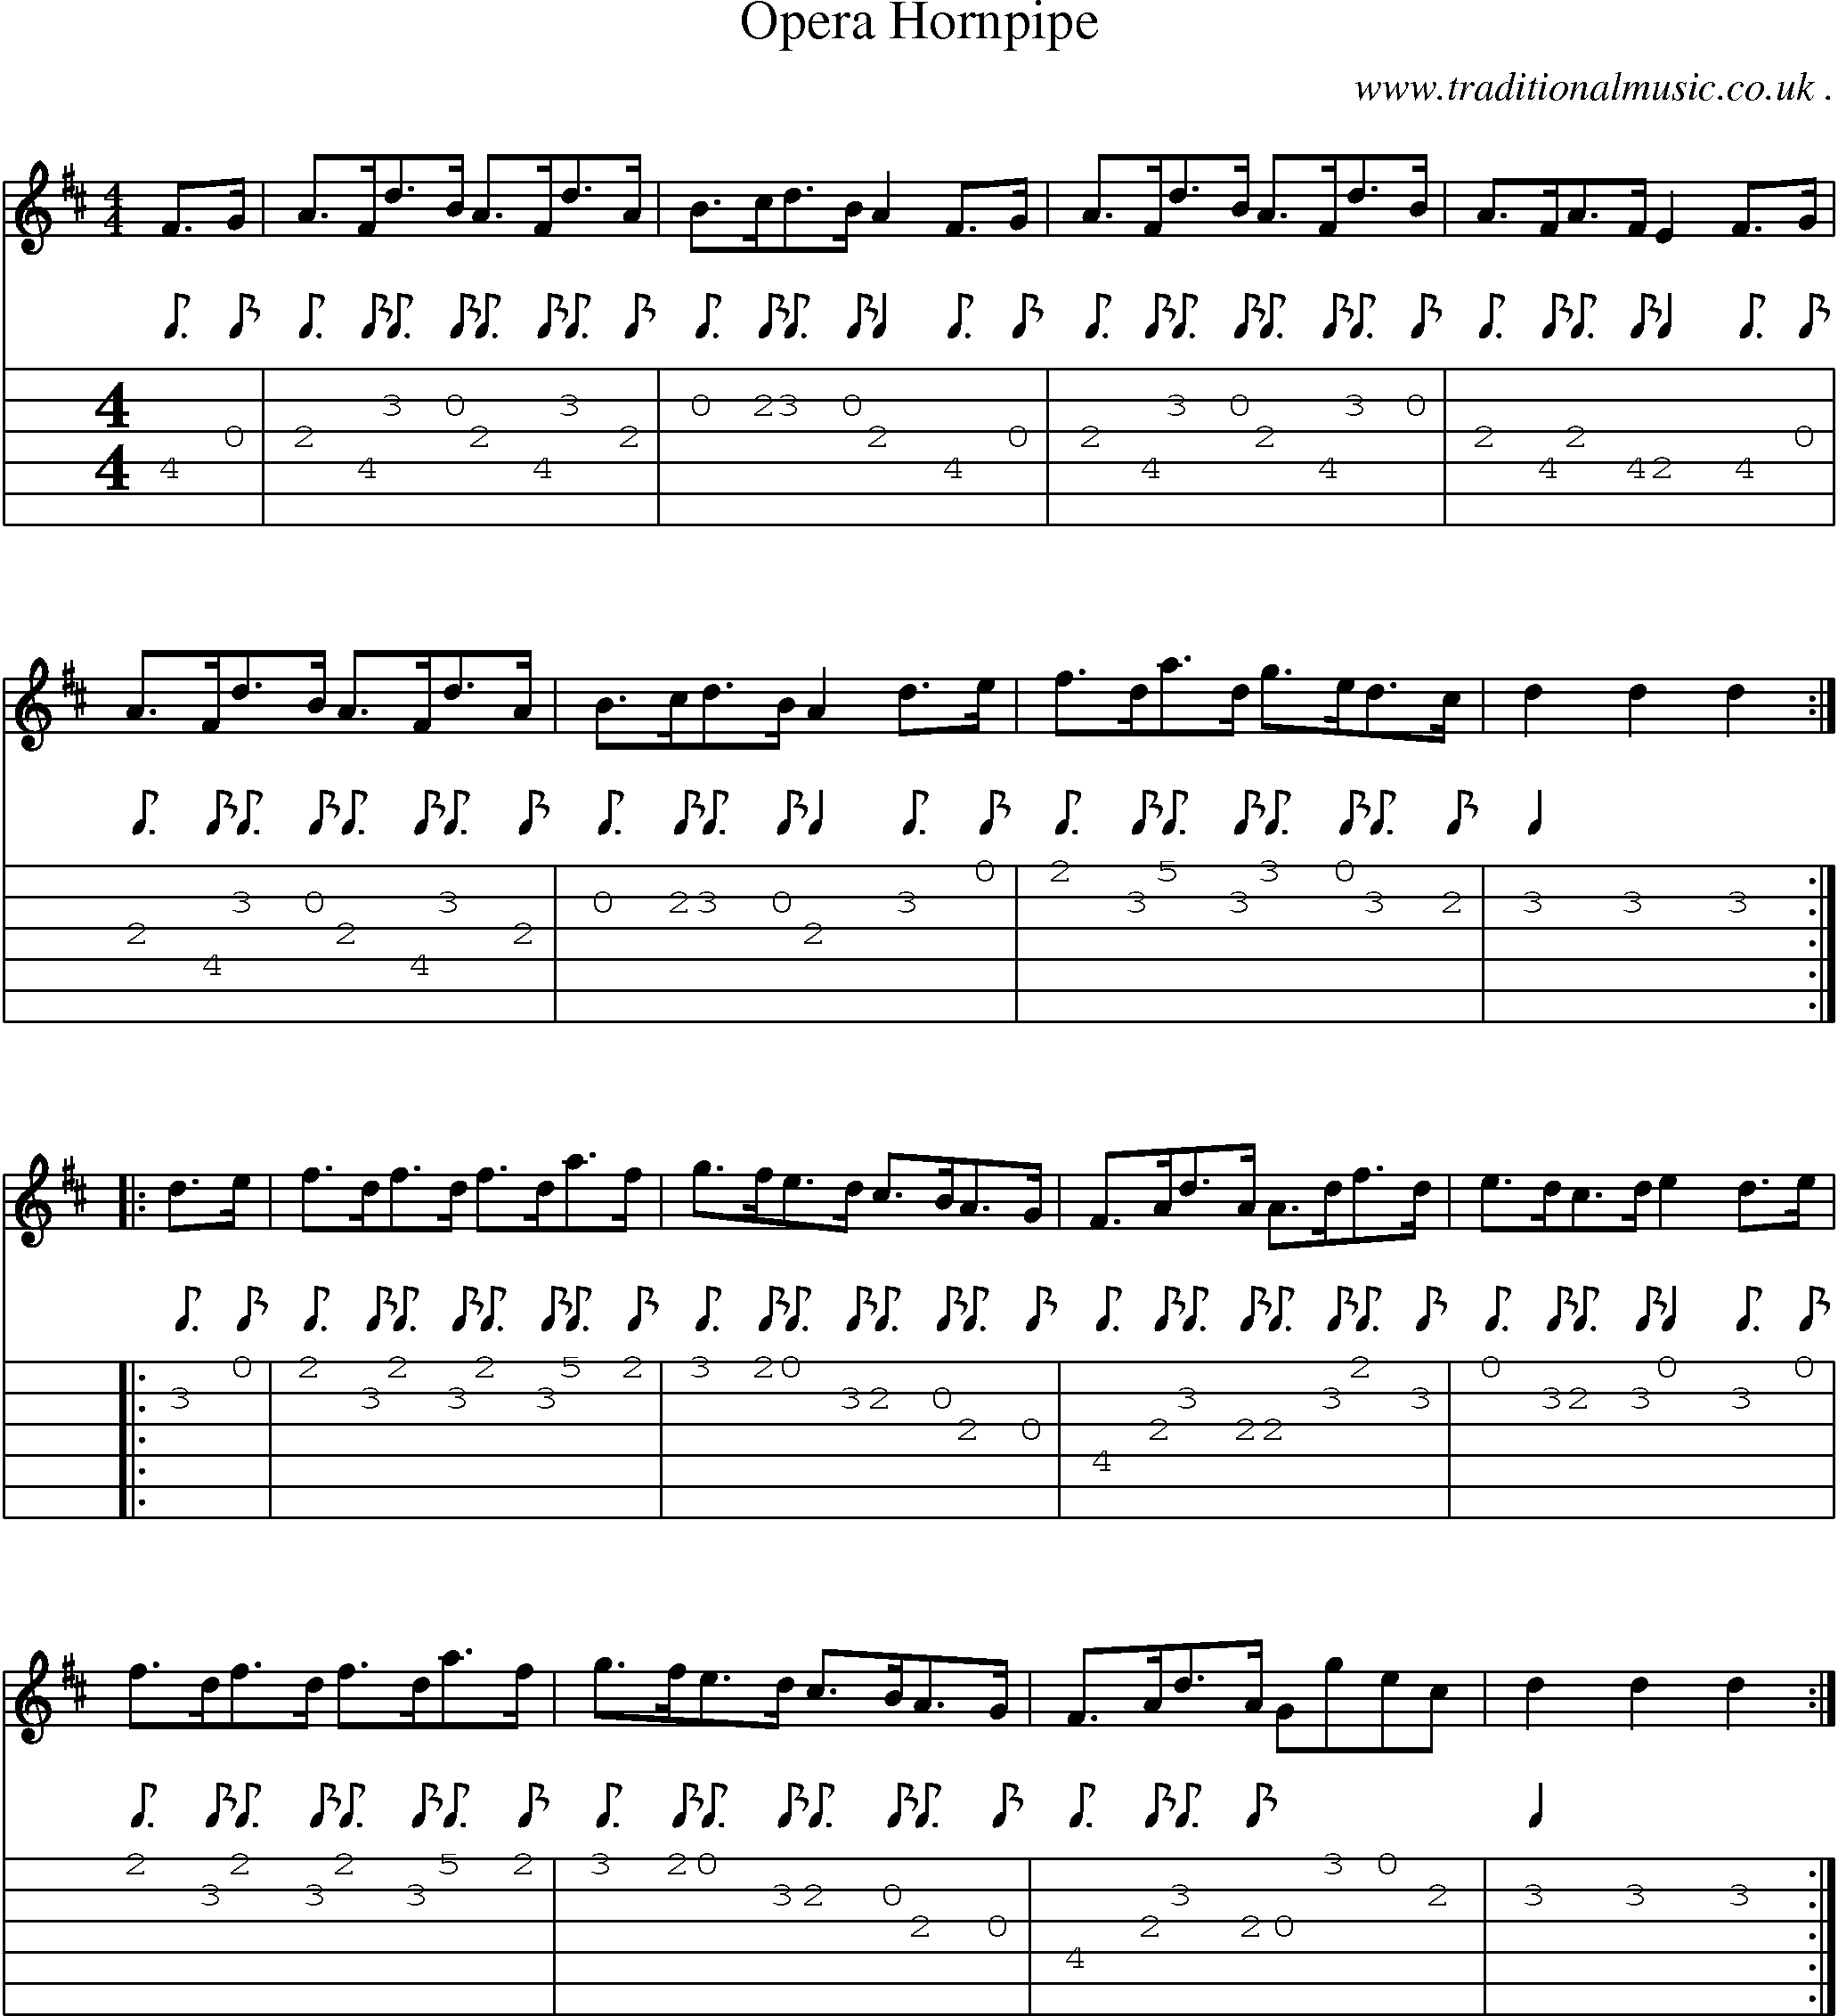 Sheet-Music and Guitar Tabs for Opera Hornpipe